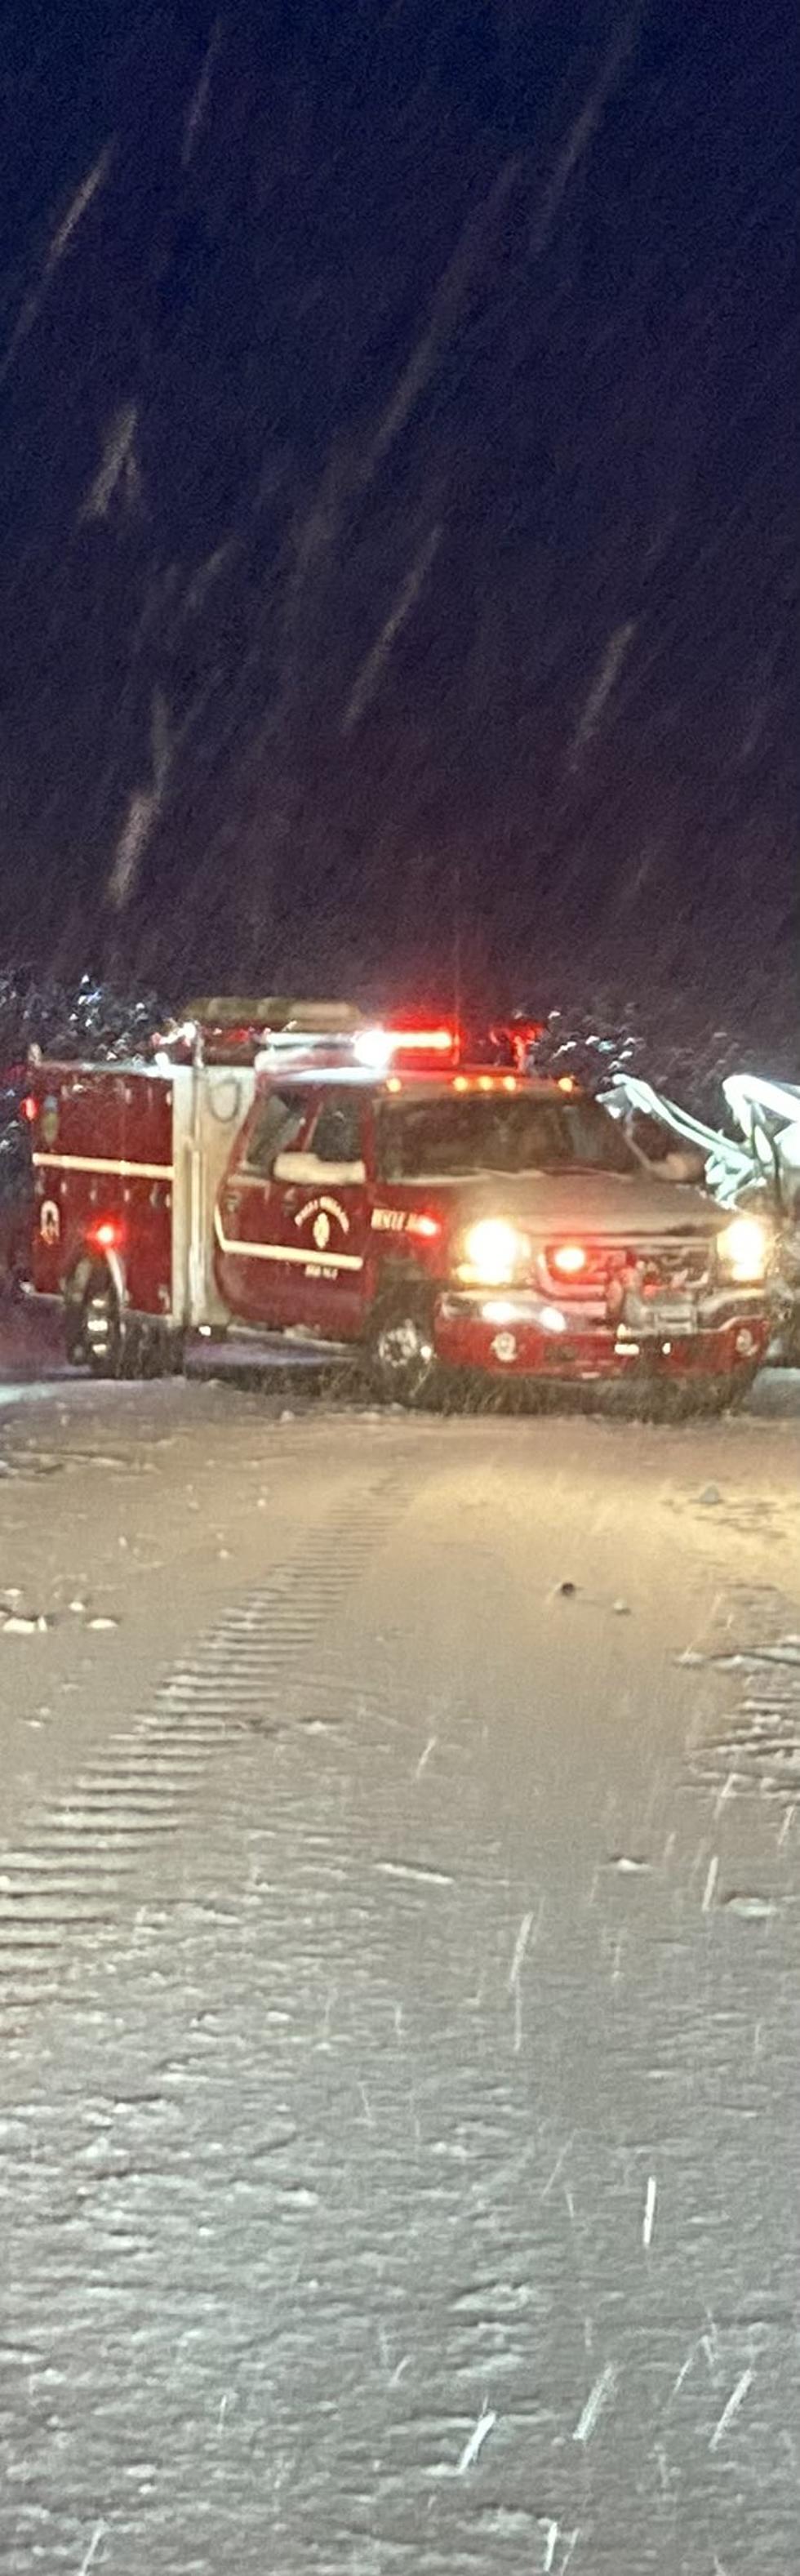 WSP is Reporting that Snowy Conditions Caused a Fatal Crash on US